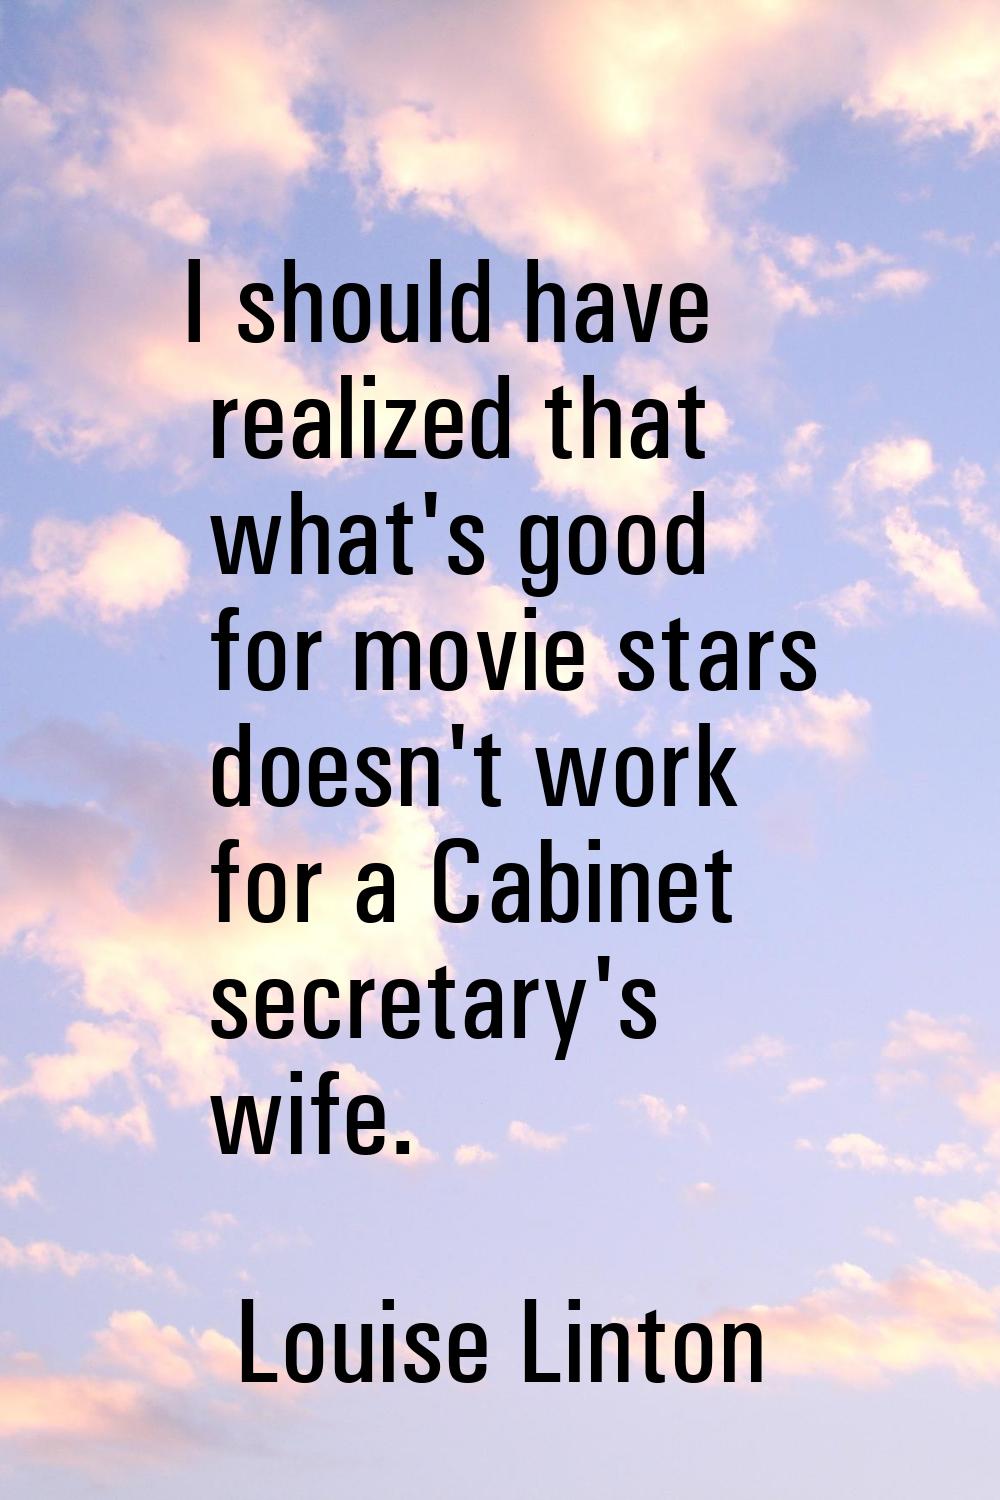 I should have realized that what's good for movie stars doesn't work for a Cabinet secretary's wife